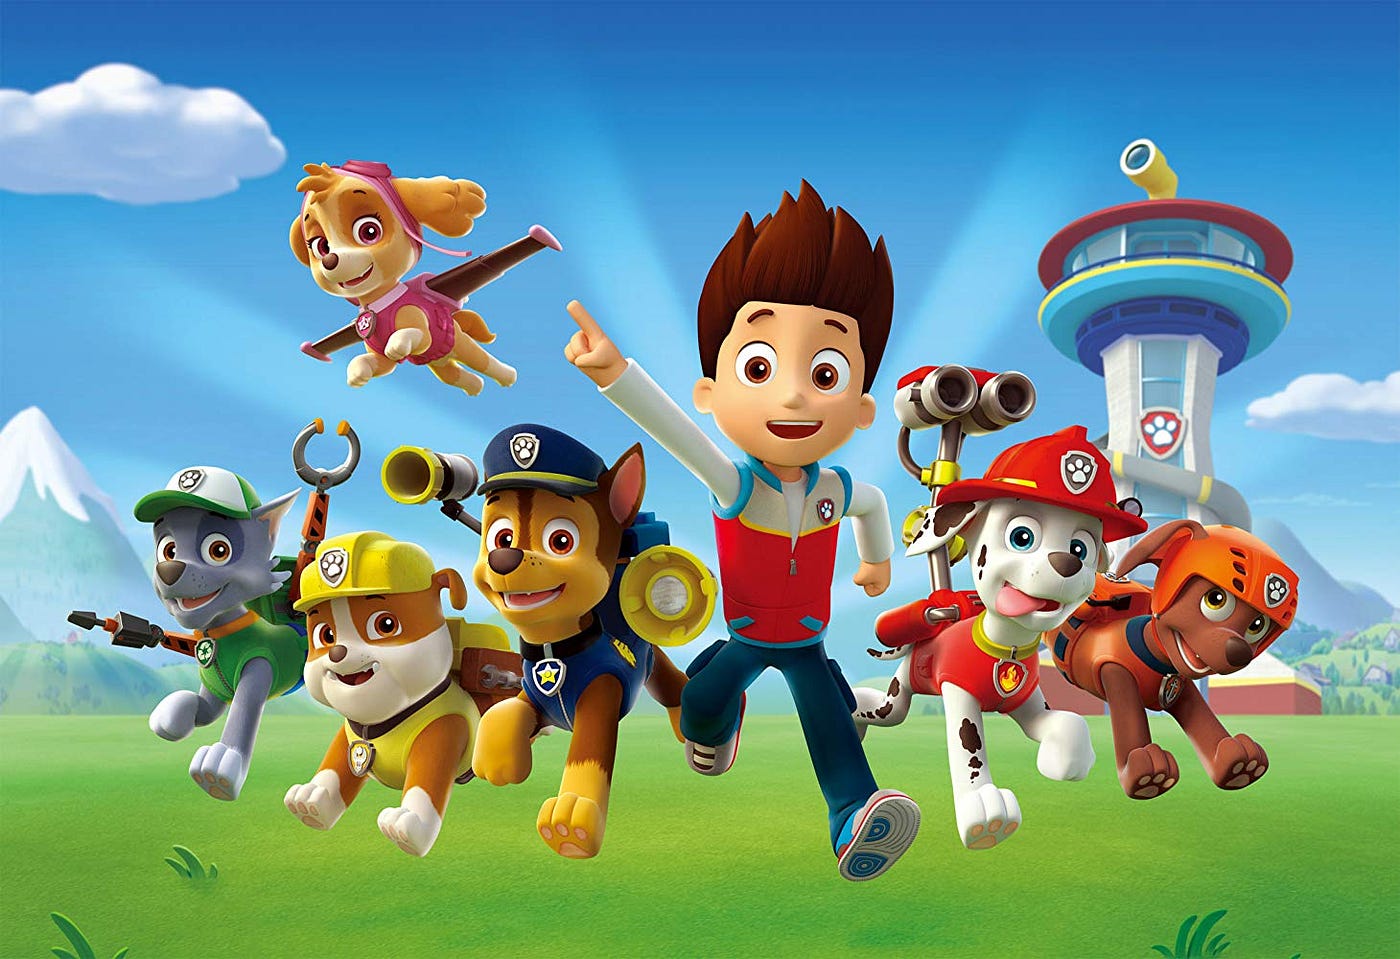 How To Watch Paw Patrol Without Cable